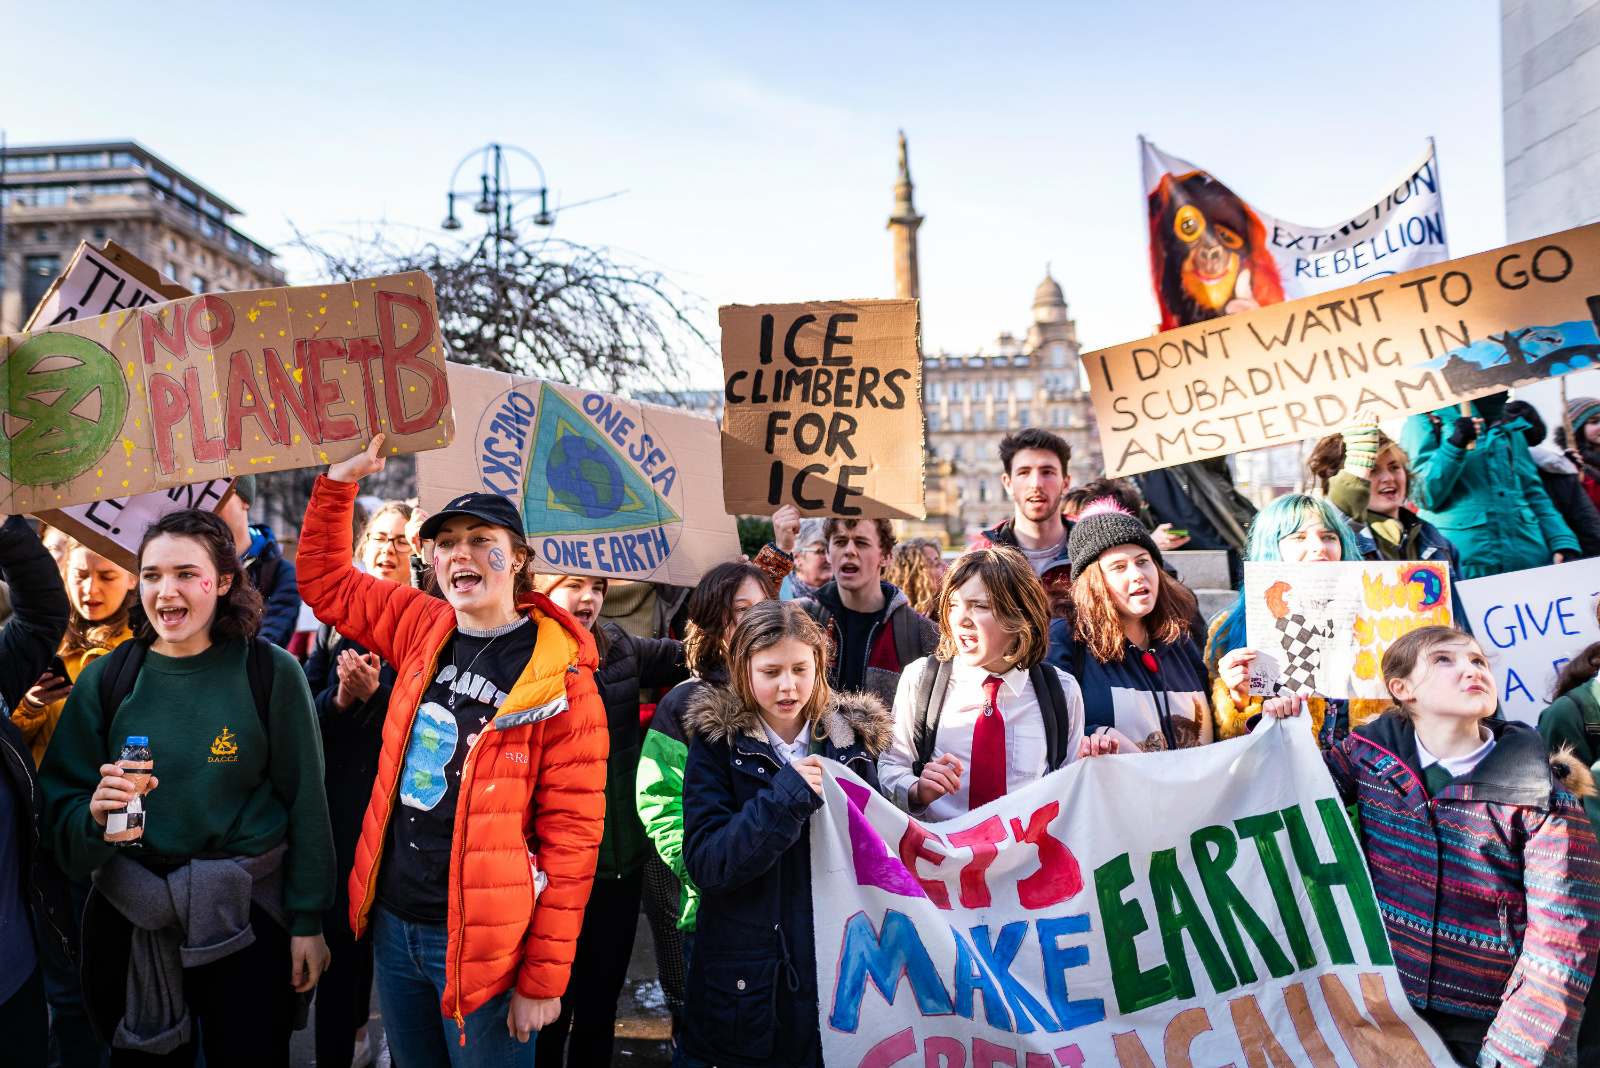 Student climate strikers in Glasgow, where COP26 is due to be held. (Image: Alamy)